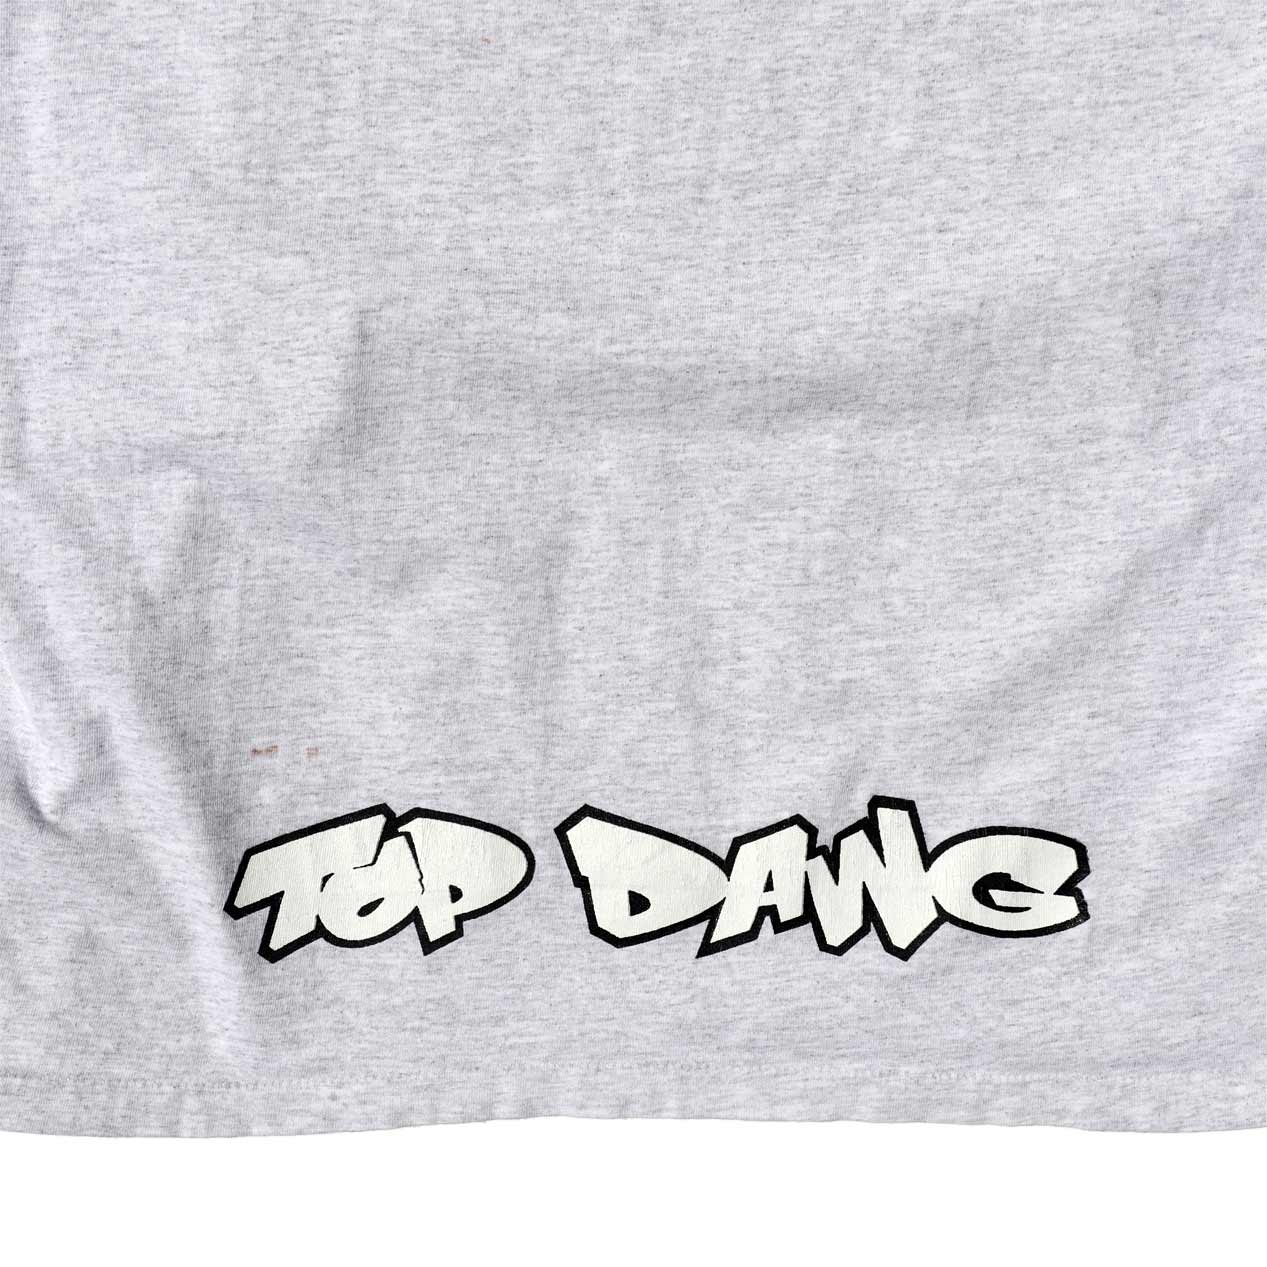 POST JUNK / 90's TOP DAWG T-Shirt Made In U.S.A. [XL]